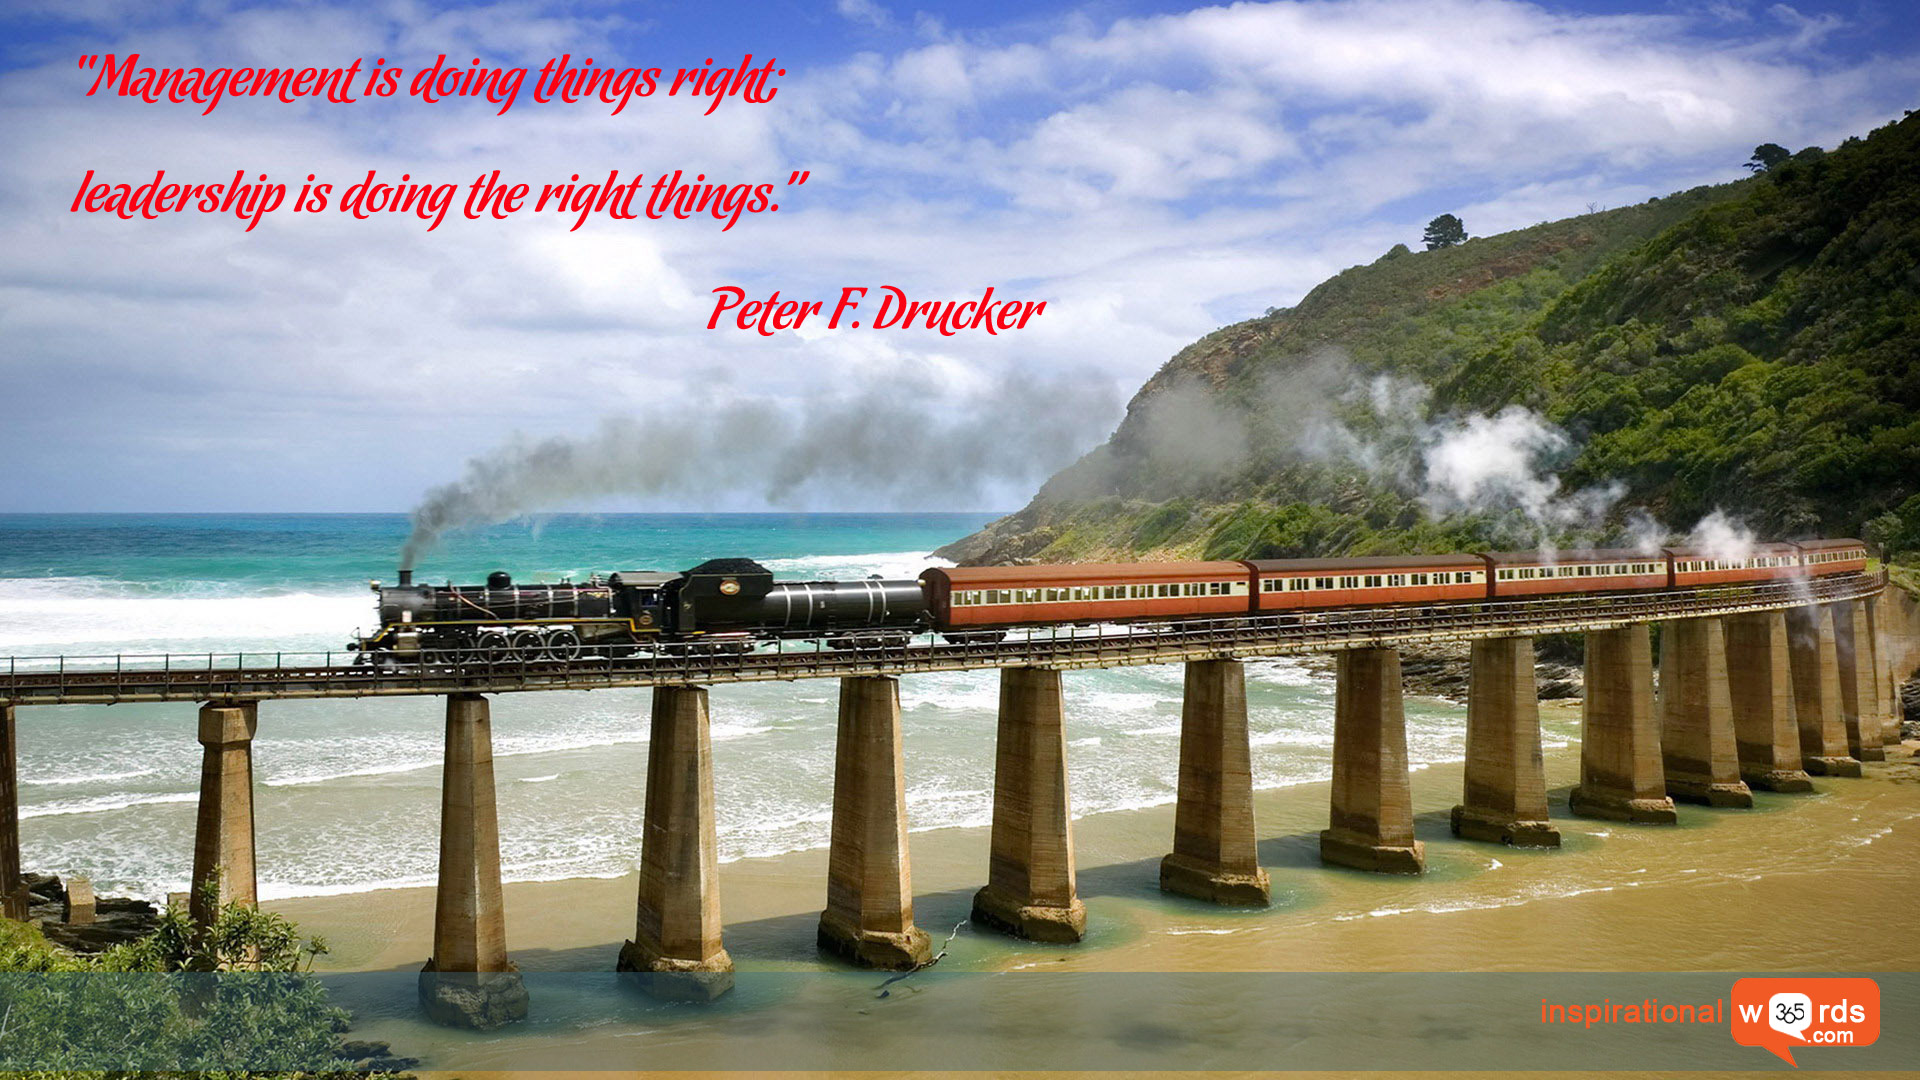 Inspirational Wallpaper Quote by Peter F. Drucker